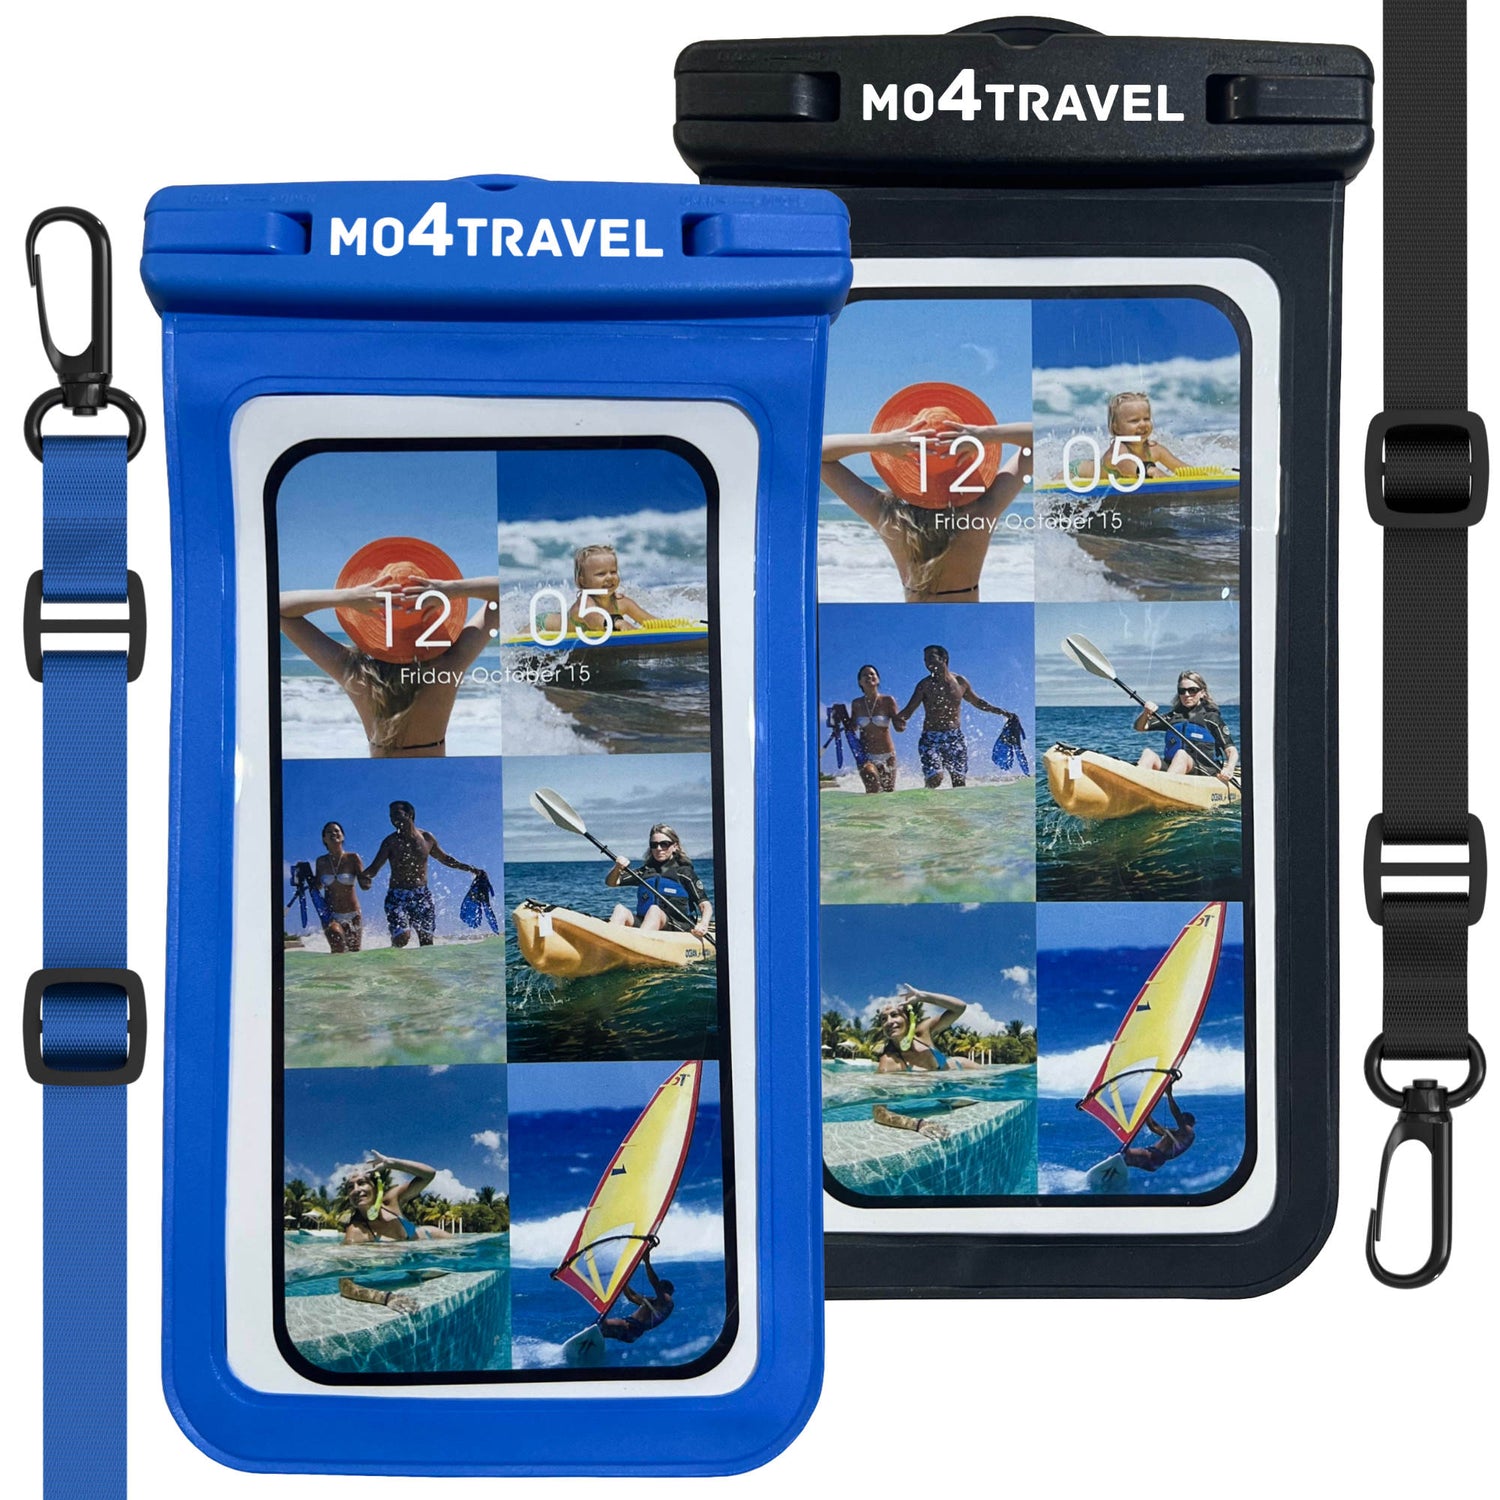 Waterproof Phone Pouch - Waterproof Cell Phone Case with Lanyard for iPhone and Android- Pack of 2-mo4travel